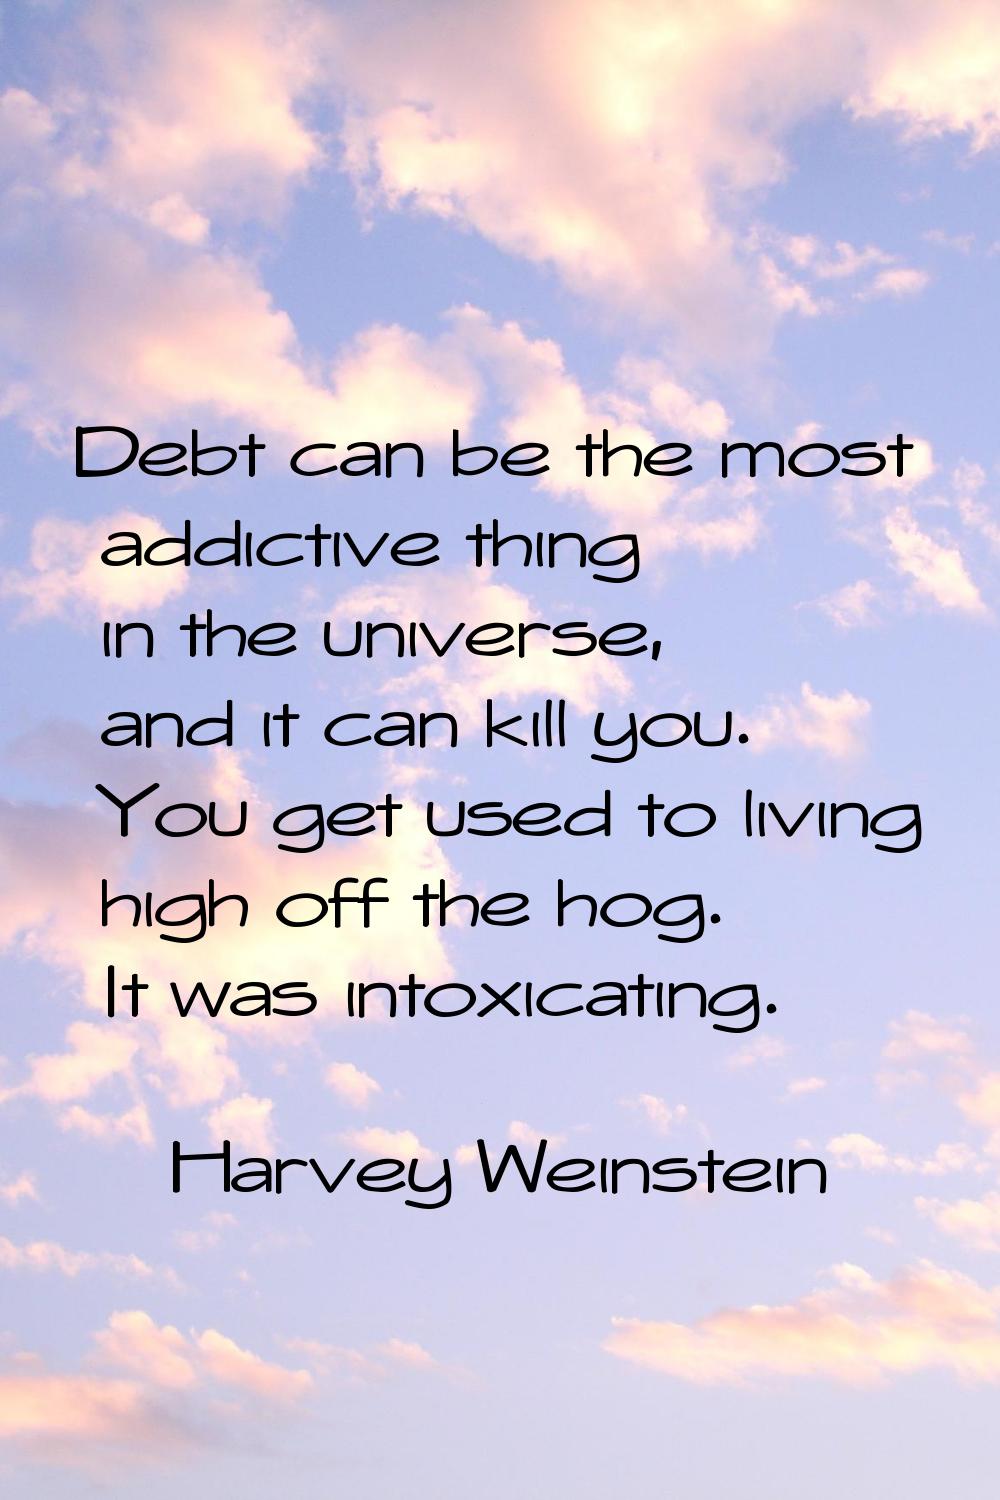 Debt can be the most addictive thing in the universe, and it can kill you. You get used to living h